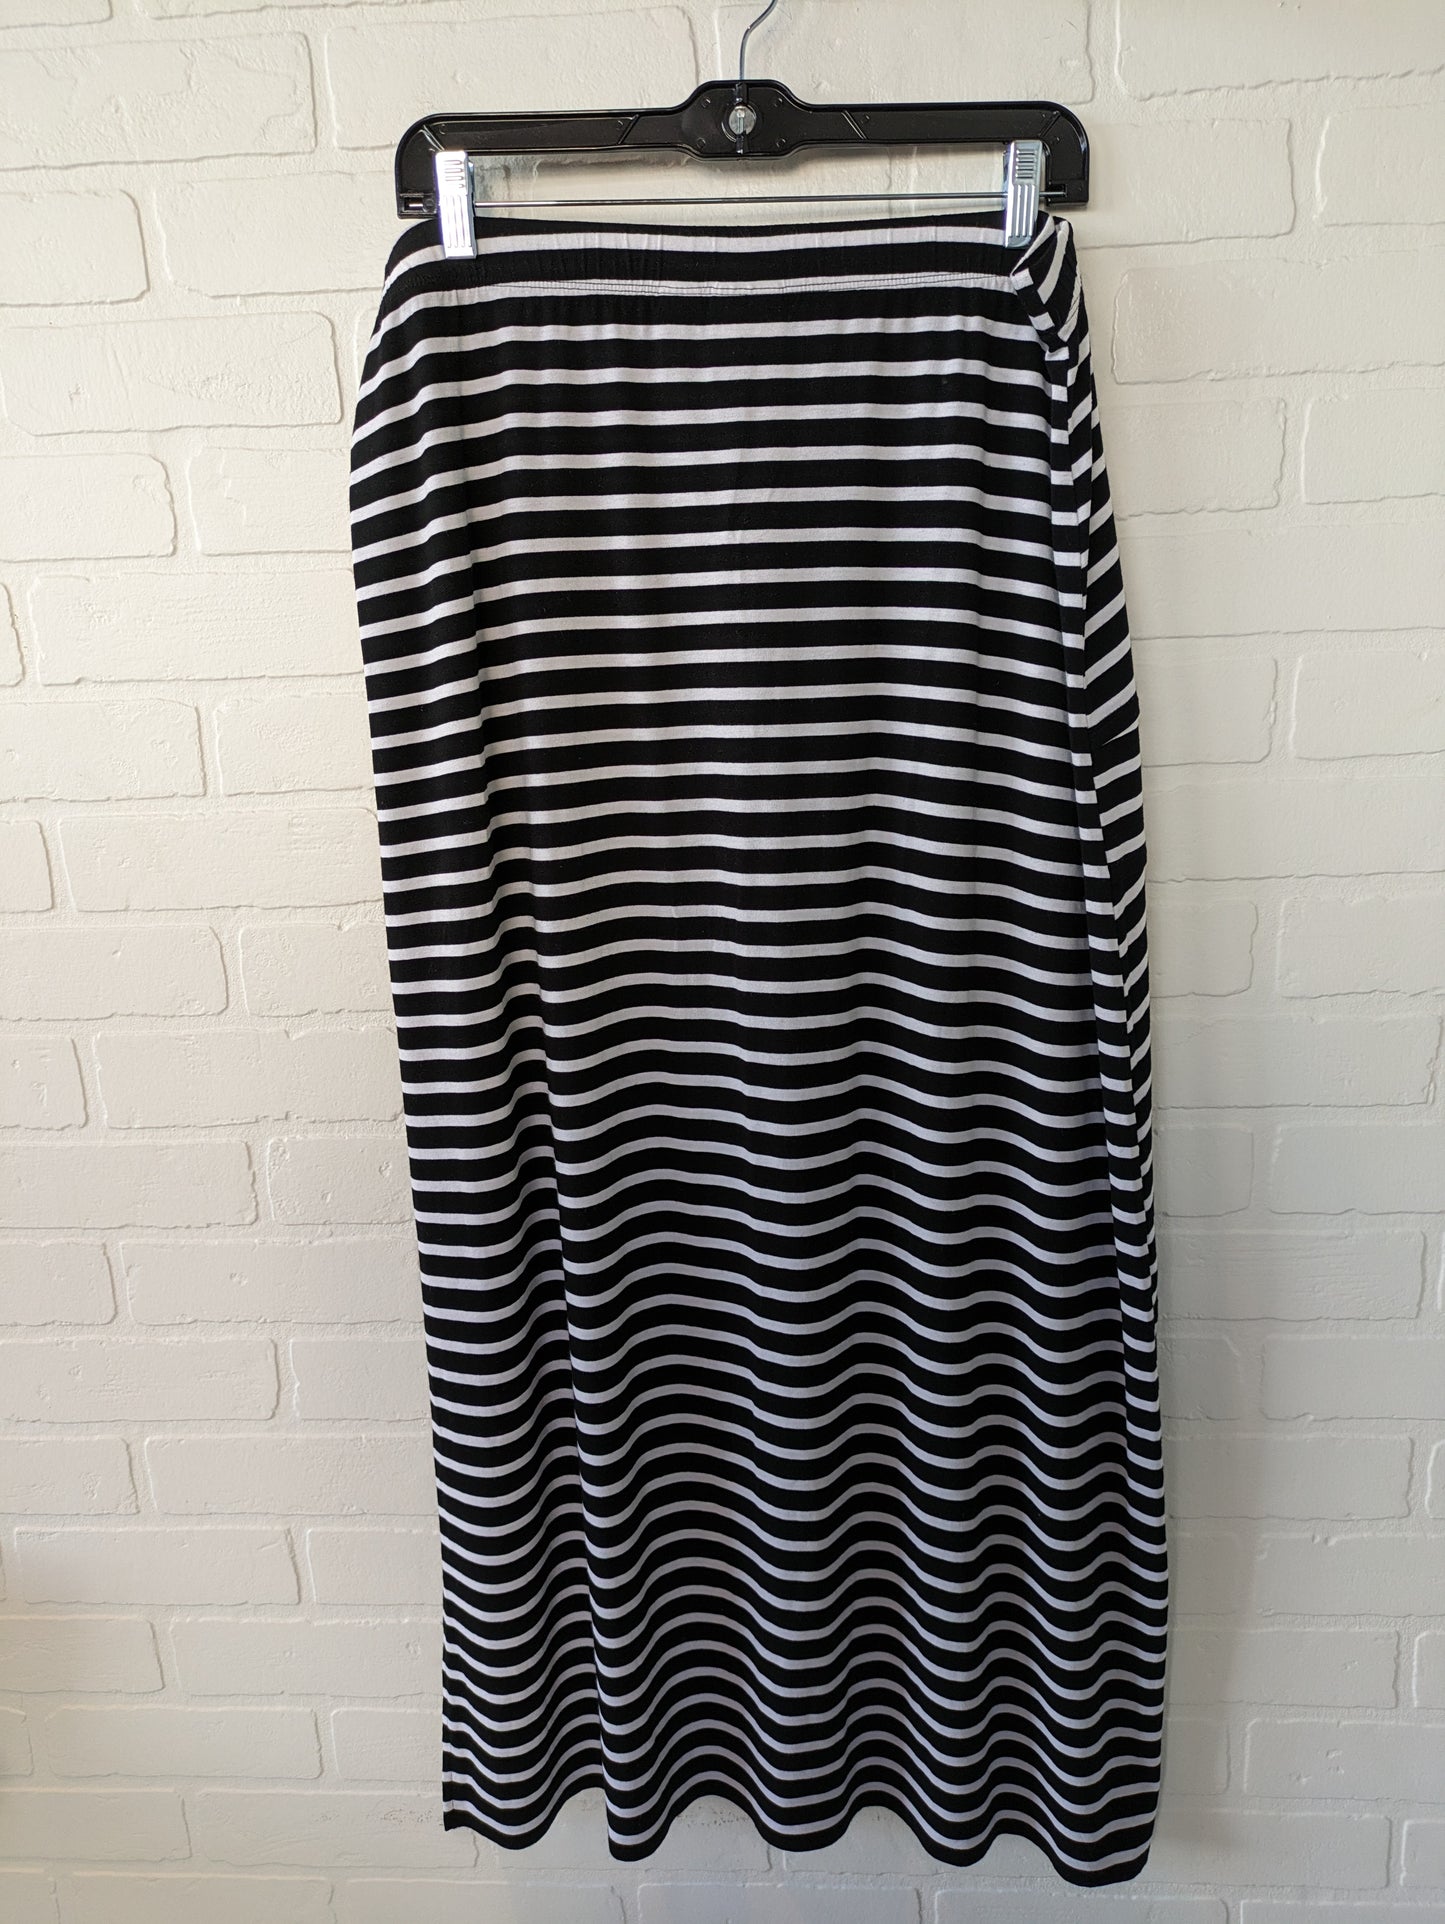 Skirt Maxi By Chicos  Size: 12